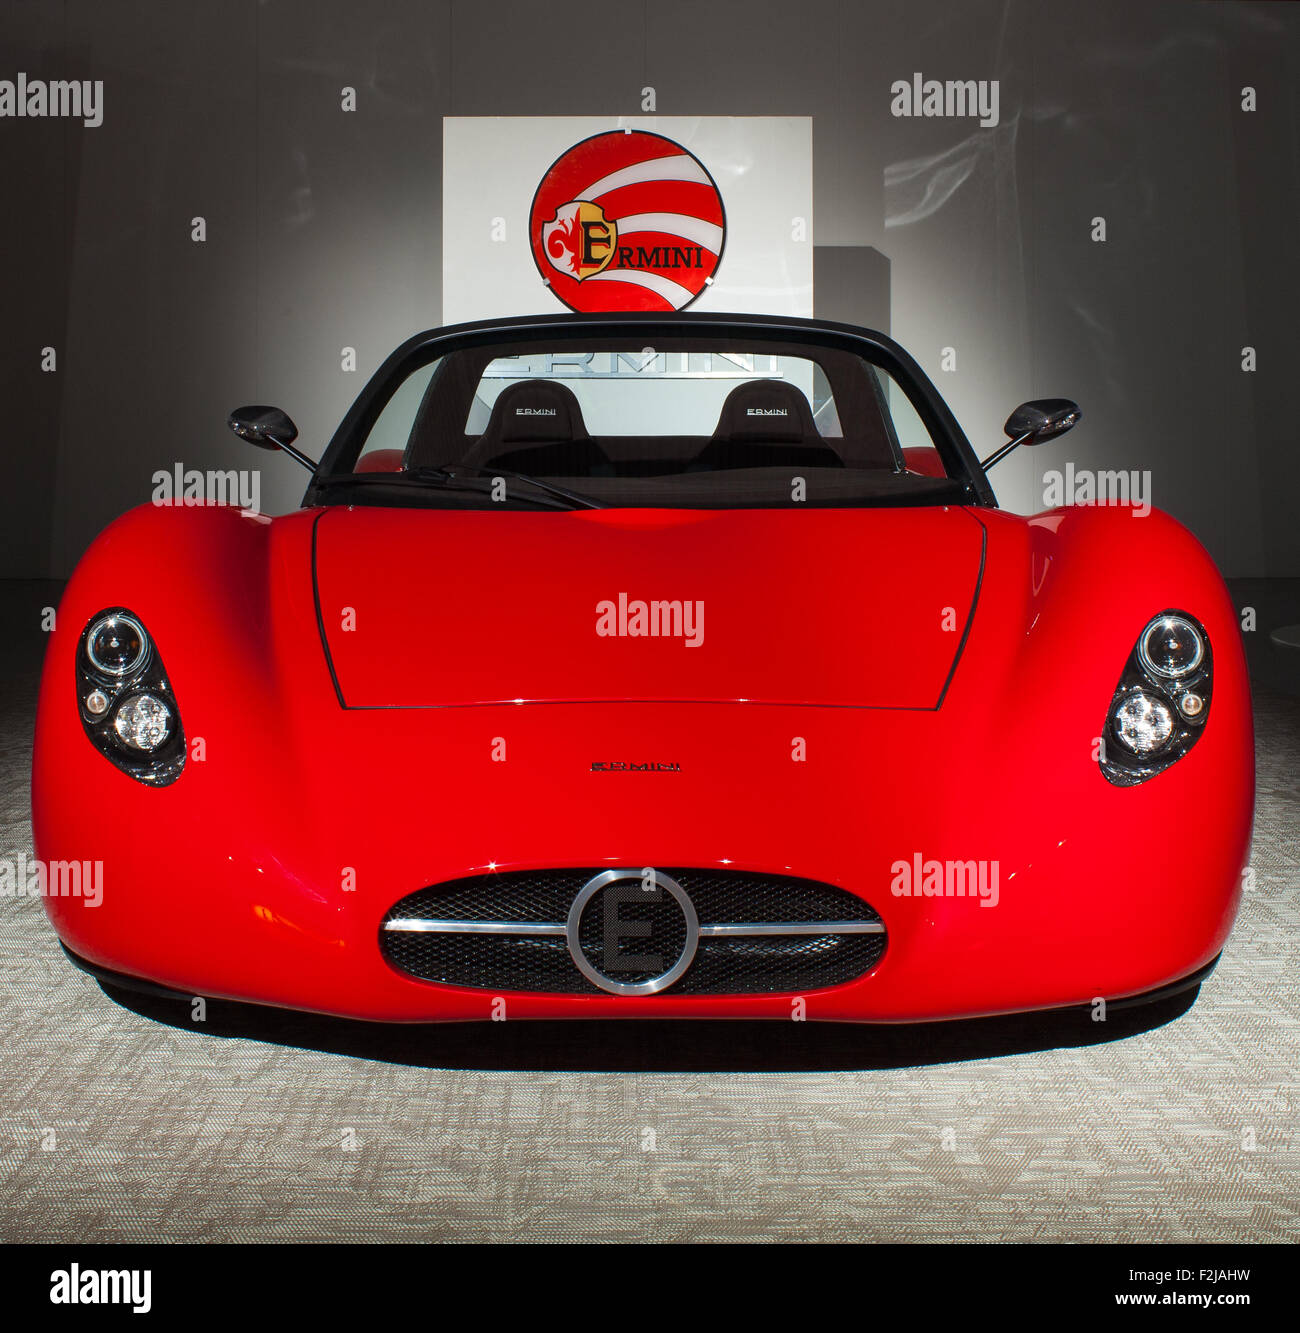 Milan, ITALY - APRIL, 13: The new Ermini sport car design by Giulio  Cappellini exsposed in the Temporary Museum for New Design d Stock Photo -  Alamy